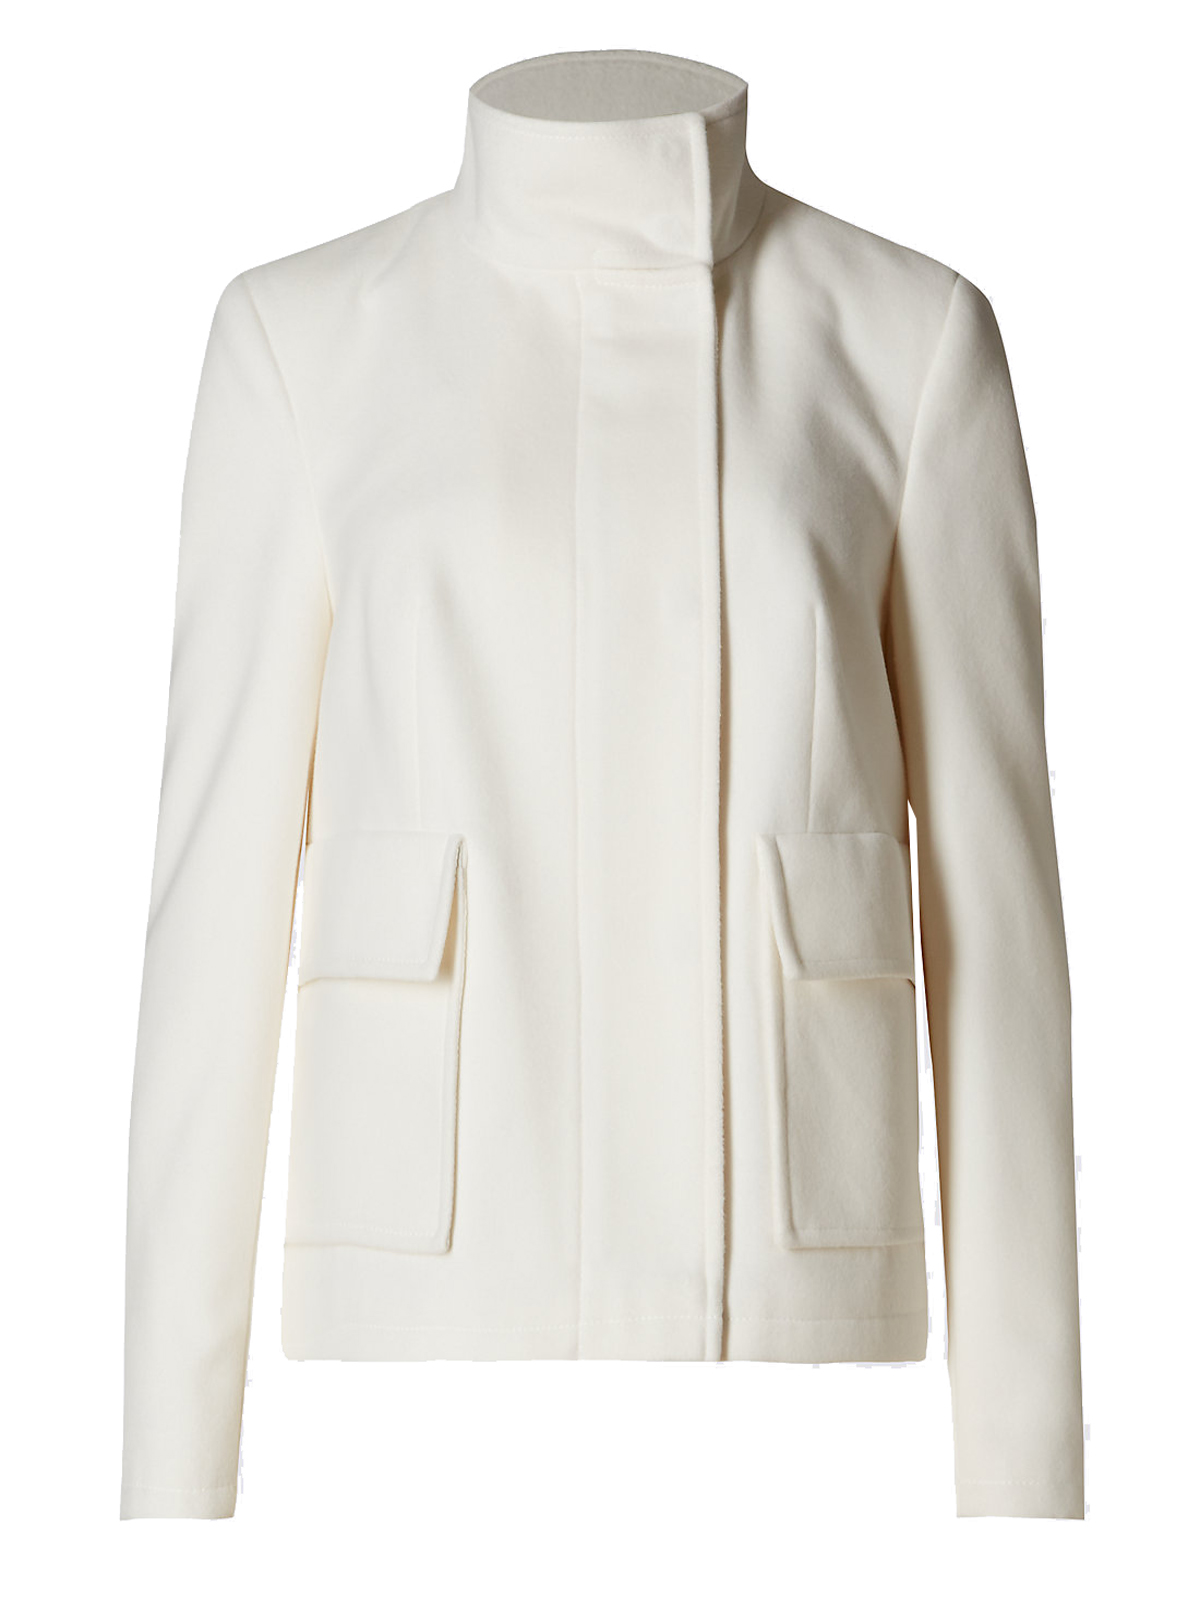 Marks and Spencer - - M&5 WINTER-WHITE Funnel Neck Jacket - Size 8 to 22